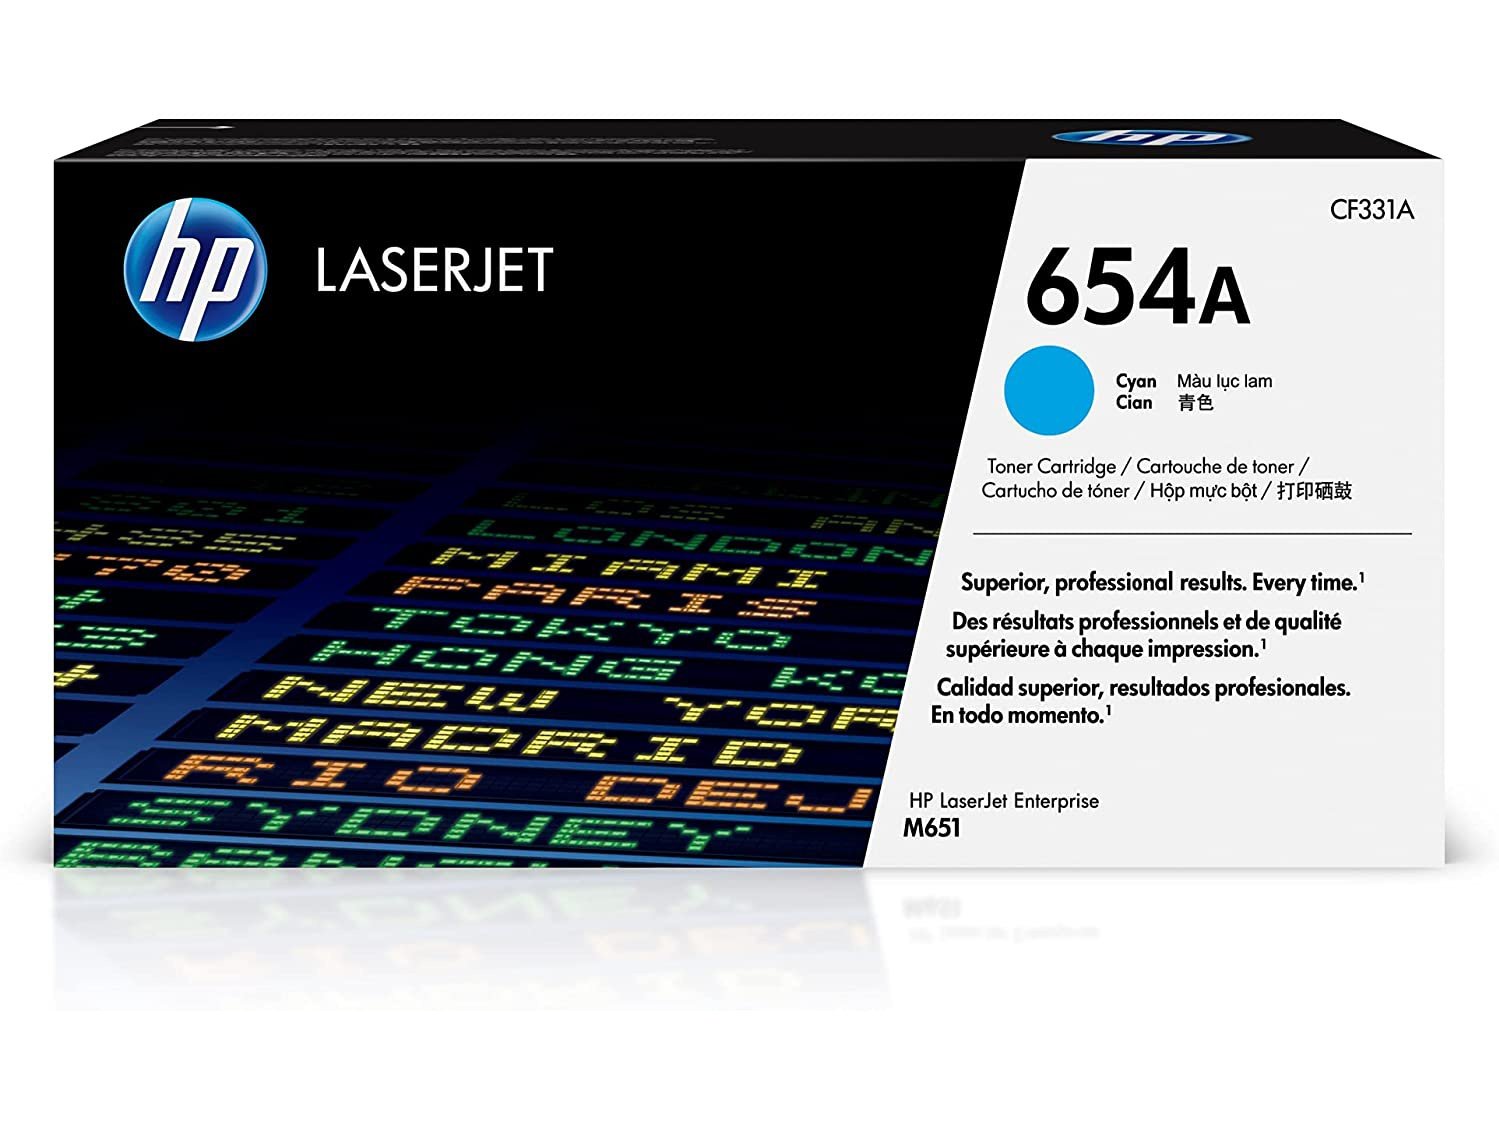 ICU Compatible/ OEM Get HP ICUCF331A Yields 15000 Pages Compatible 654A Cyan CF331A Laser Toner Cartridge for Hewlett Packard Printers - Ink Cartridges USA